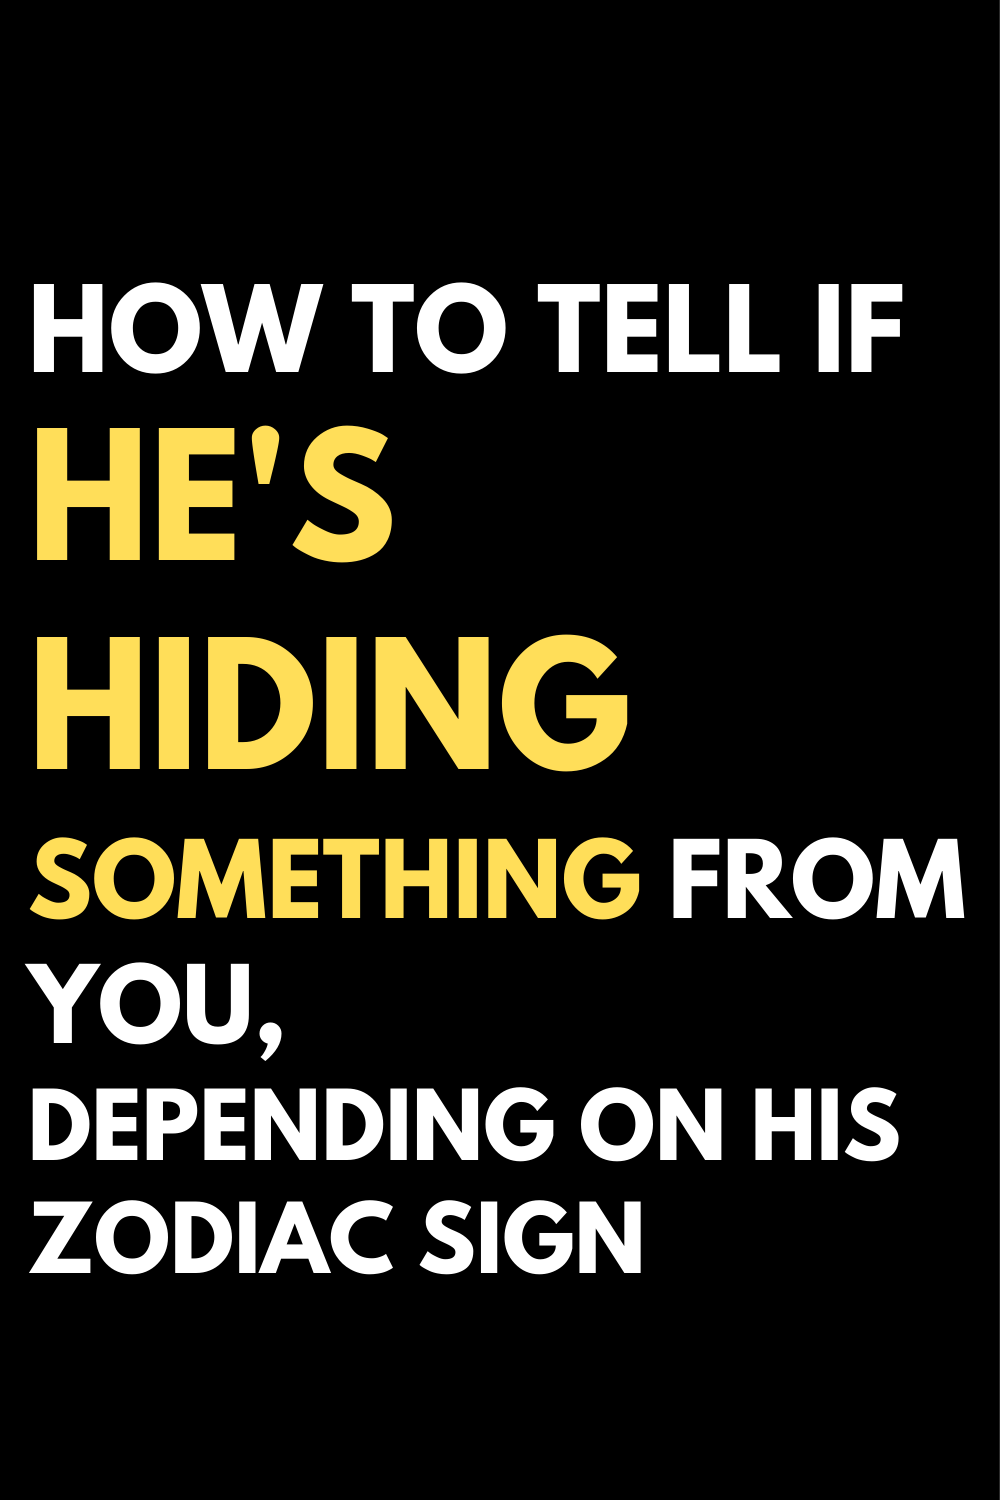 How to tell if he's hiding something from you, depending on his zodiac sign